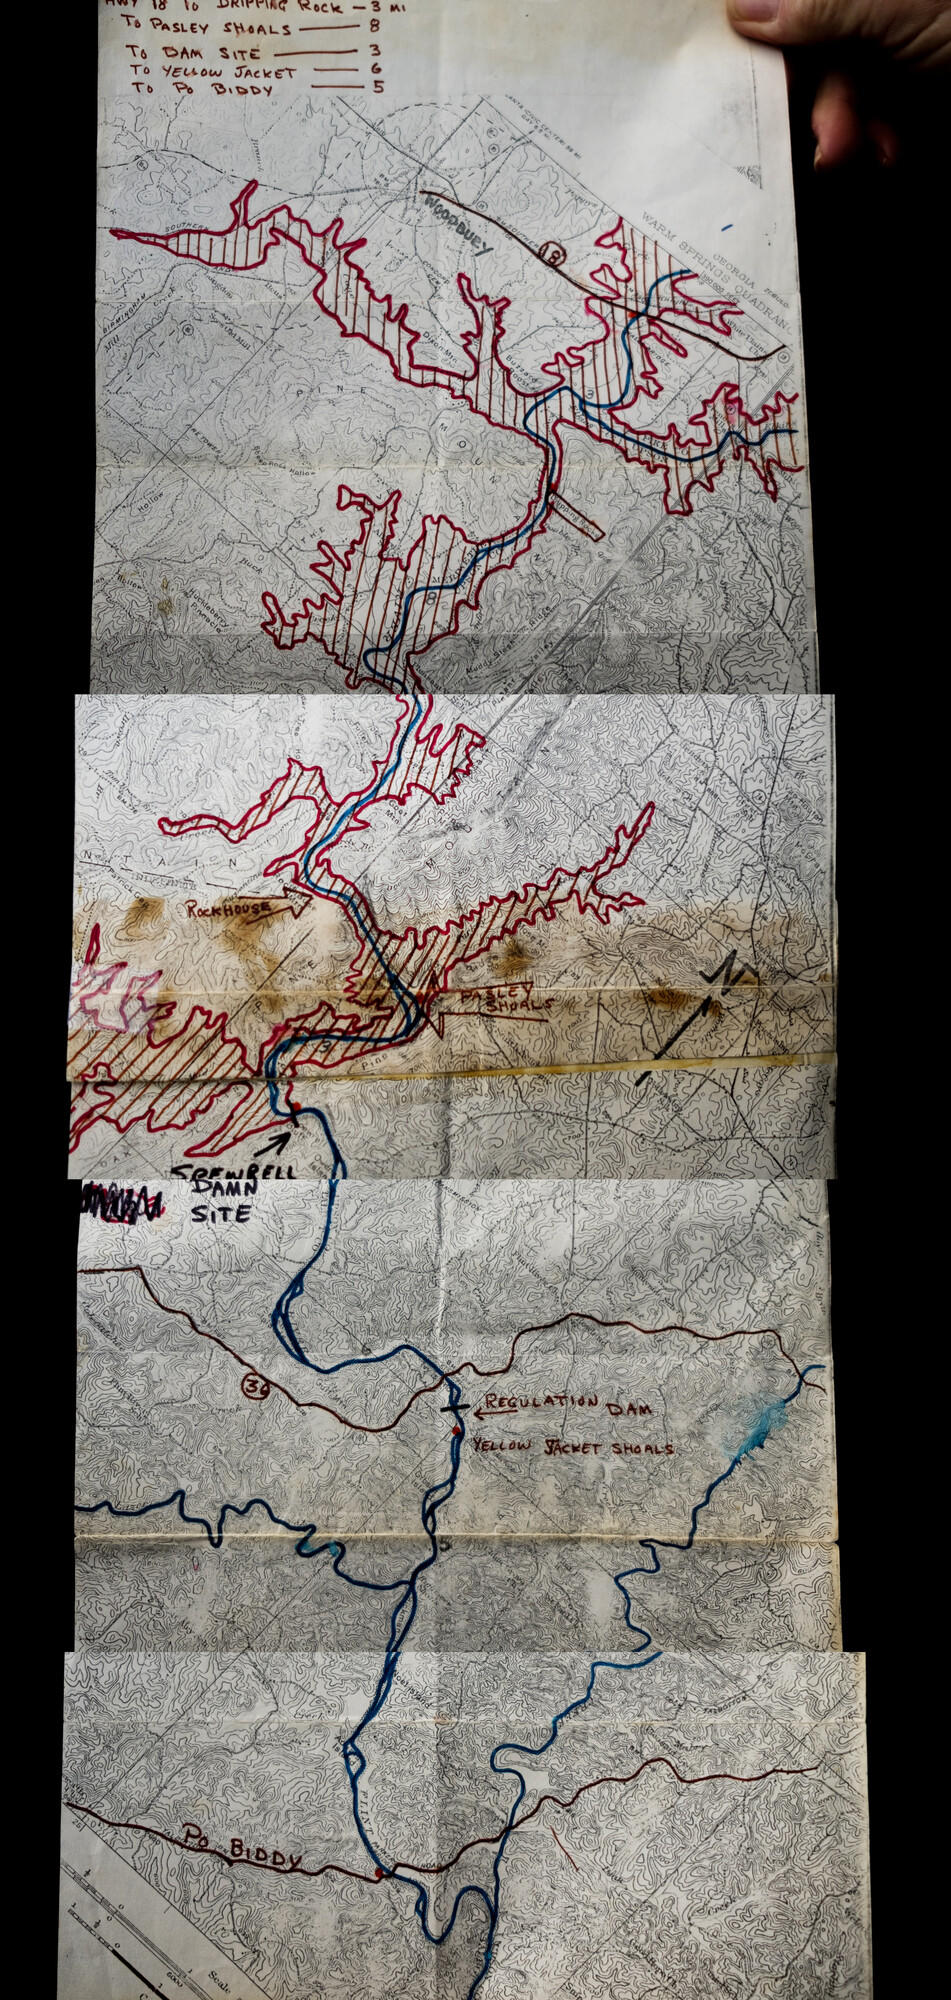 An approximately 50-year-old map of the Sprewell Bluff Dam project on the Flint River made by Tom Morgan and now owned by his daughter Janet Morgan Mapel.